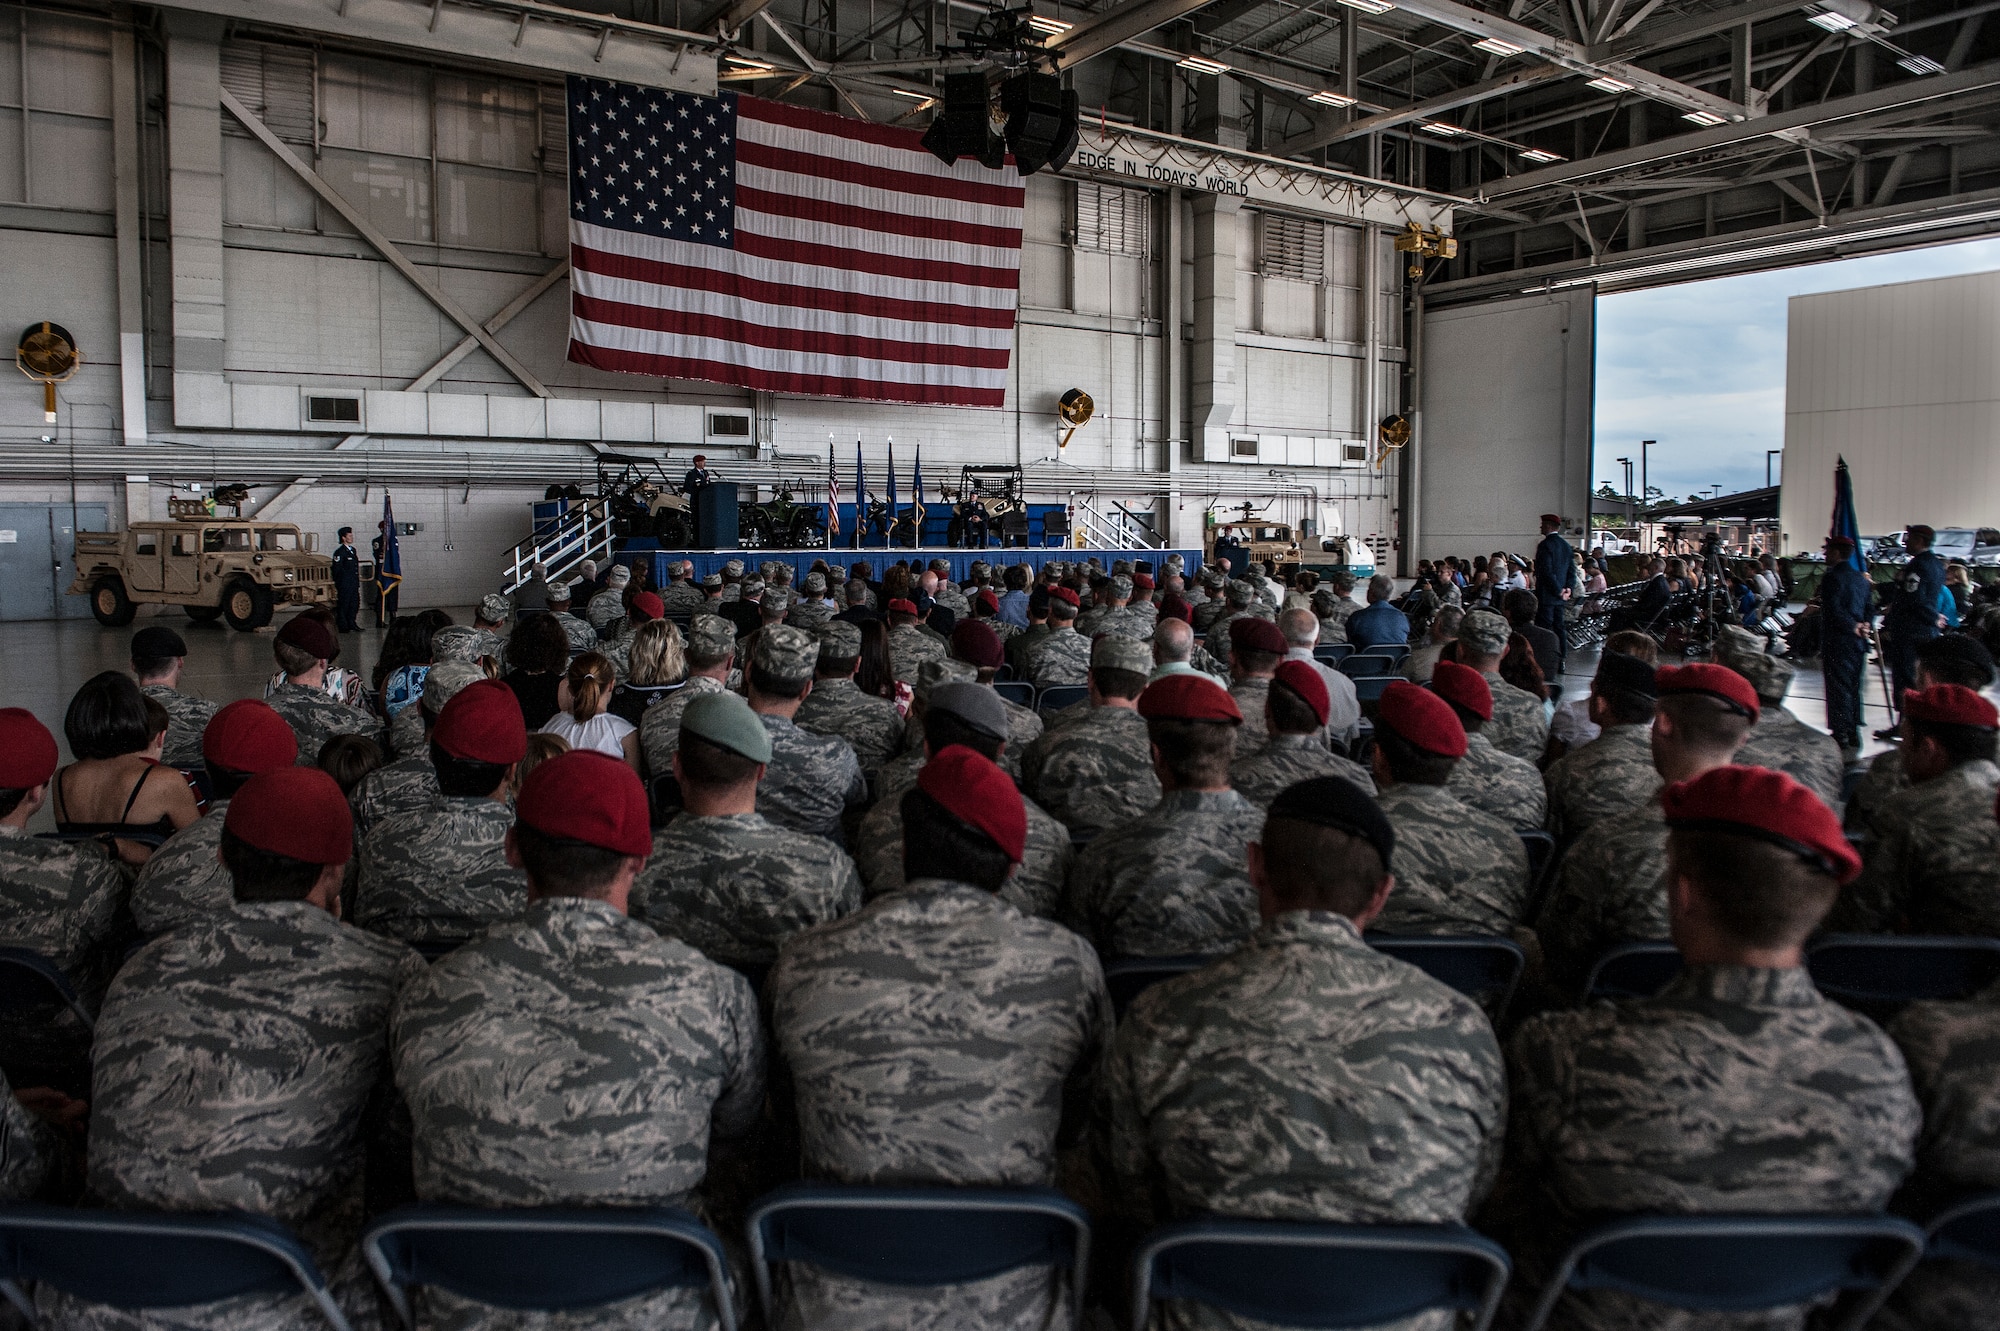 U.S. Air Force members gathered at Freedom Hangar for the 720th Special Tactics Group change of command and the activation of the 24th Special Operations Wing on Hurlburt Field, Fla., June 12, 2012. Col. Robert Armfield relinquished command of the 720th STG to Col. Kurt Buller then assumed command of the 24th SOW. (U.S. Air Force photo/Airman 1st Class Christopher Williams